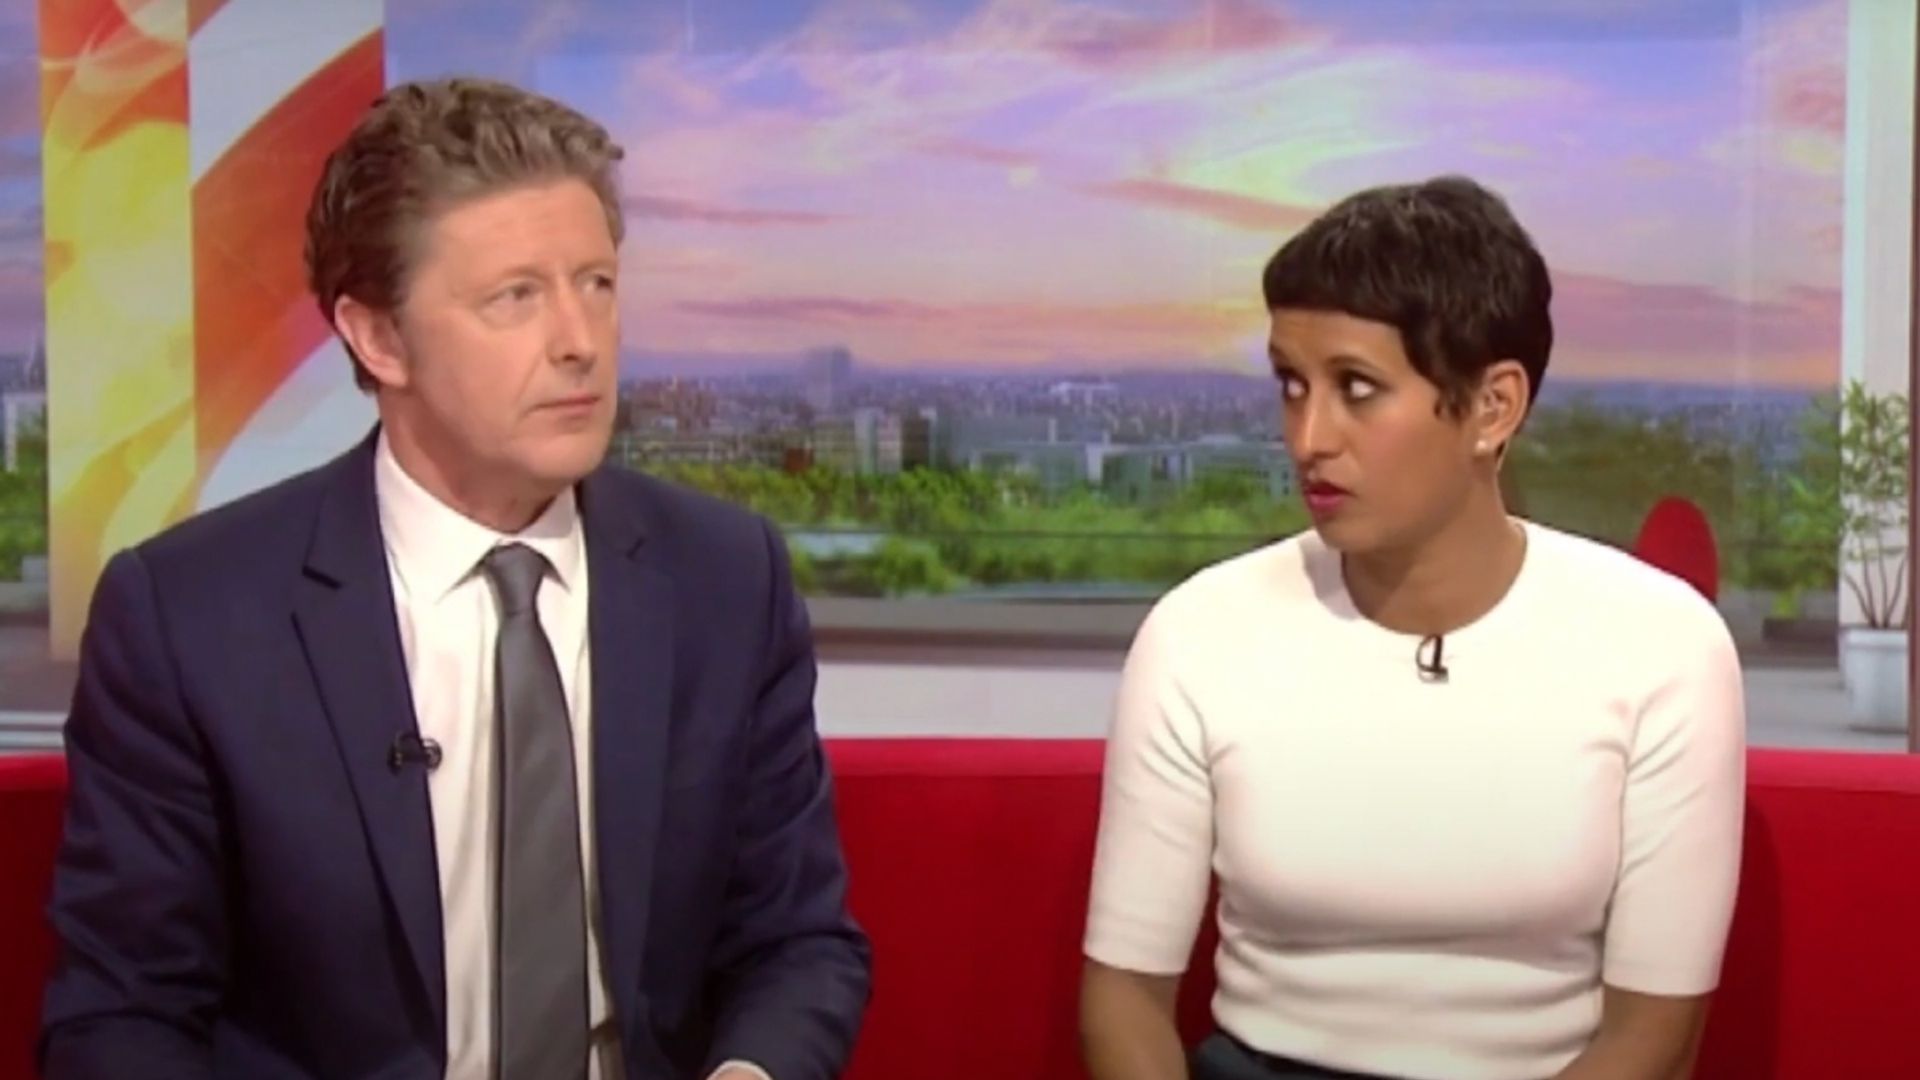 BBC Breakfast shake-up sees Charlie Stayt absent from red sofa